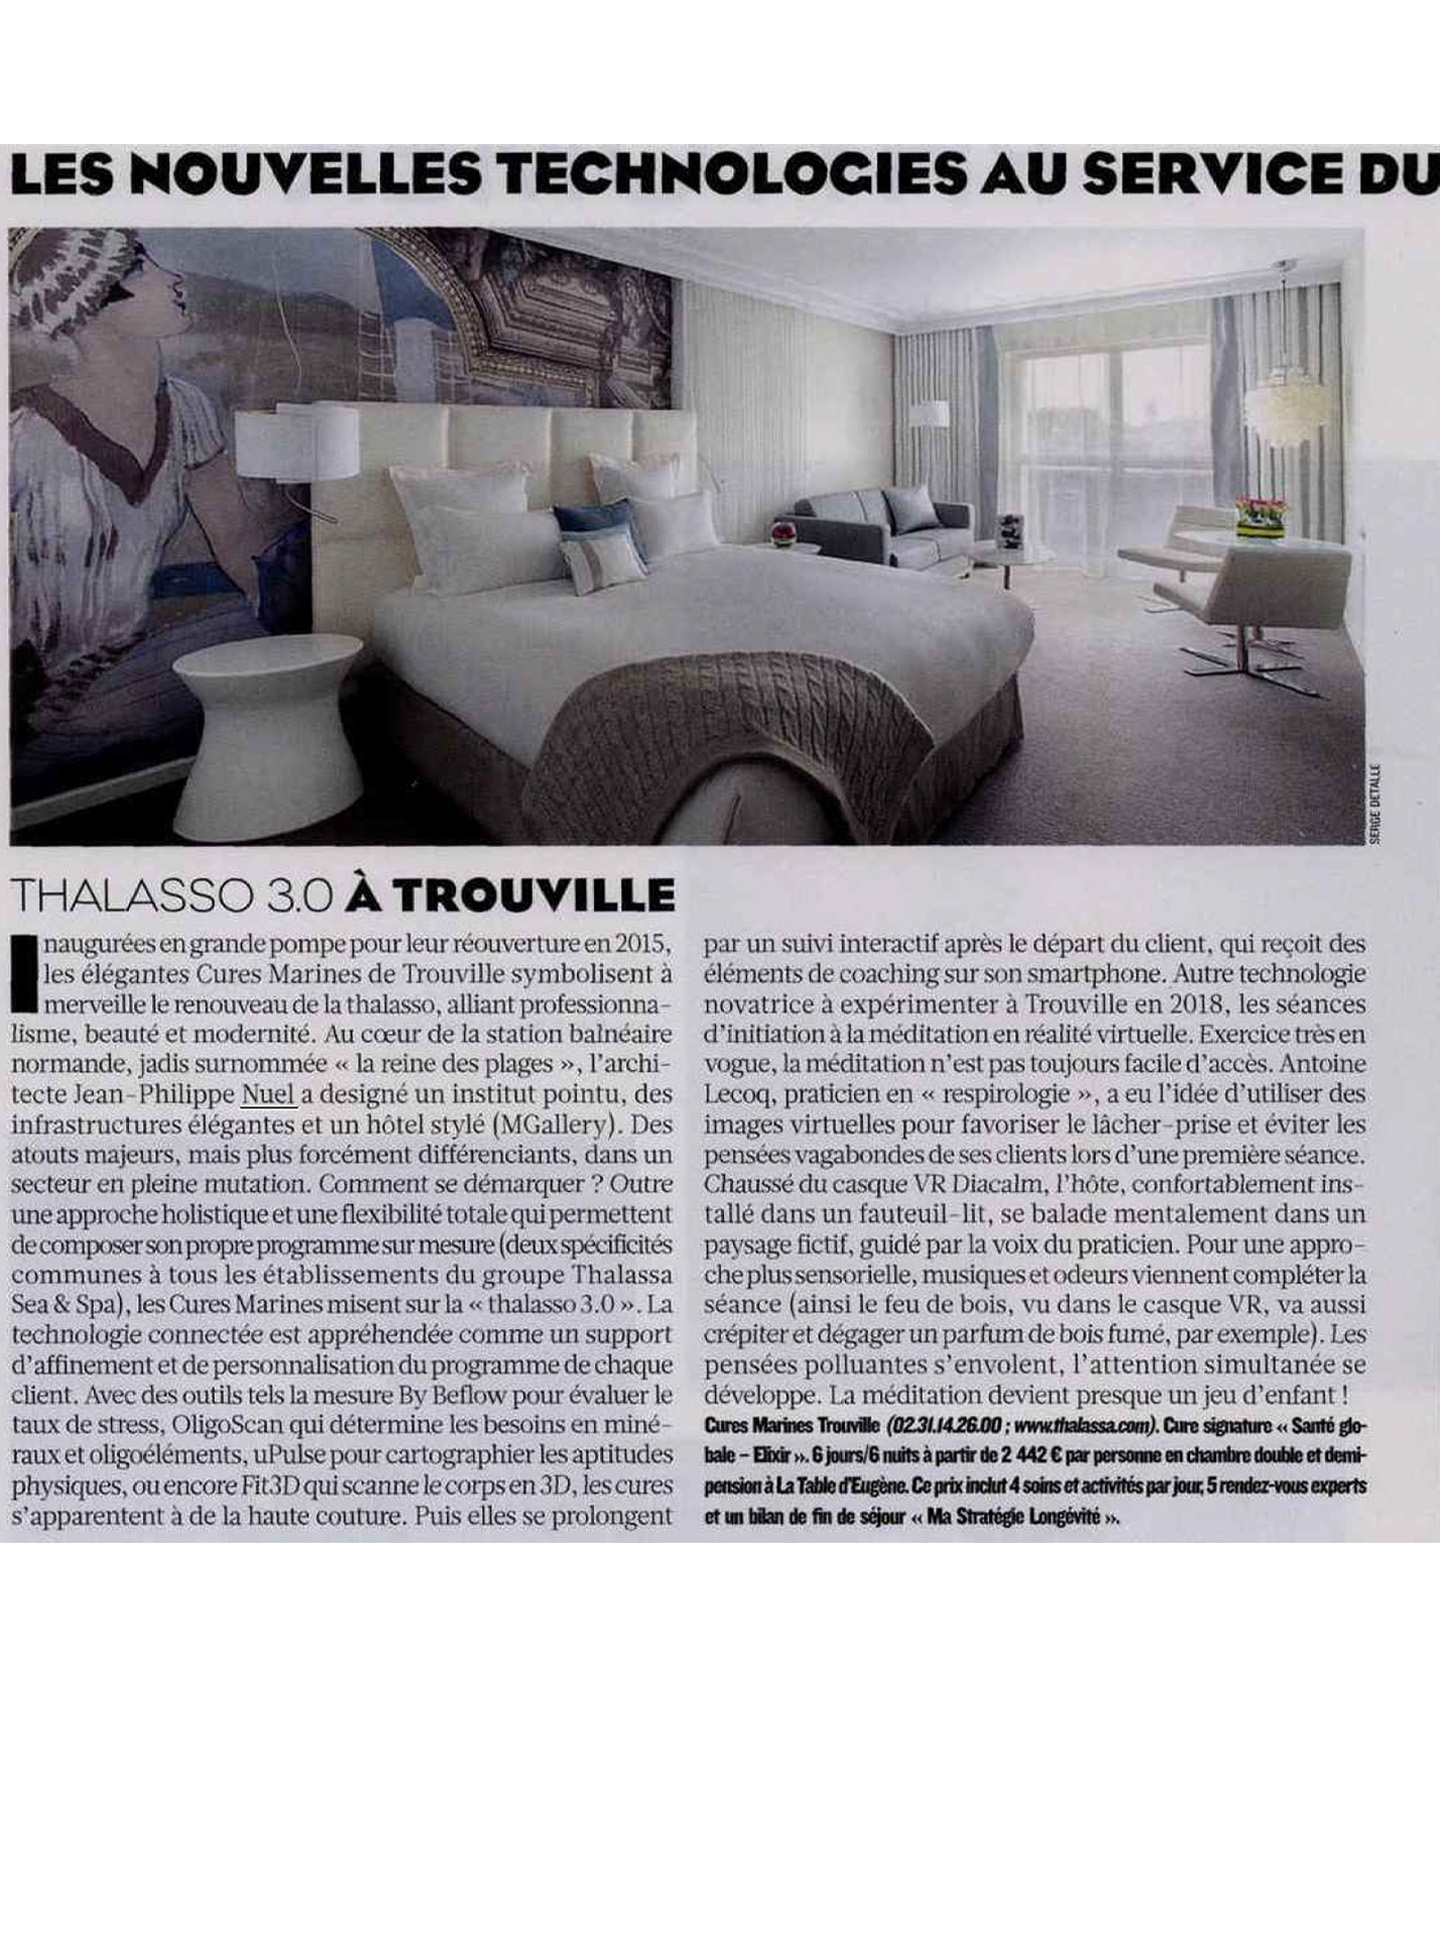 Article on the marine cures of trouville realized by the studio jean-Philippe Nuel in the figaro magazine, new luxury hotel, luxury interior design, thalasso